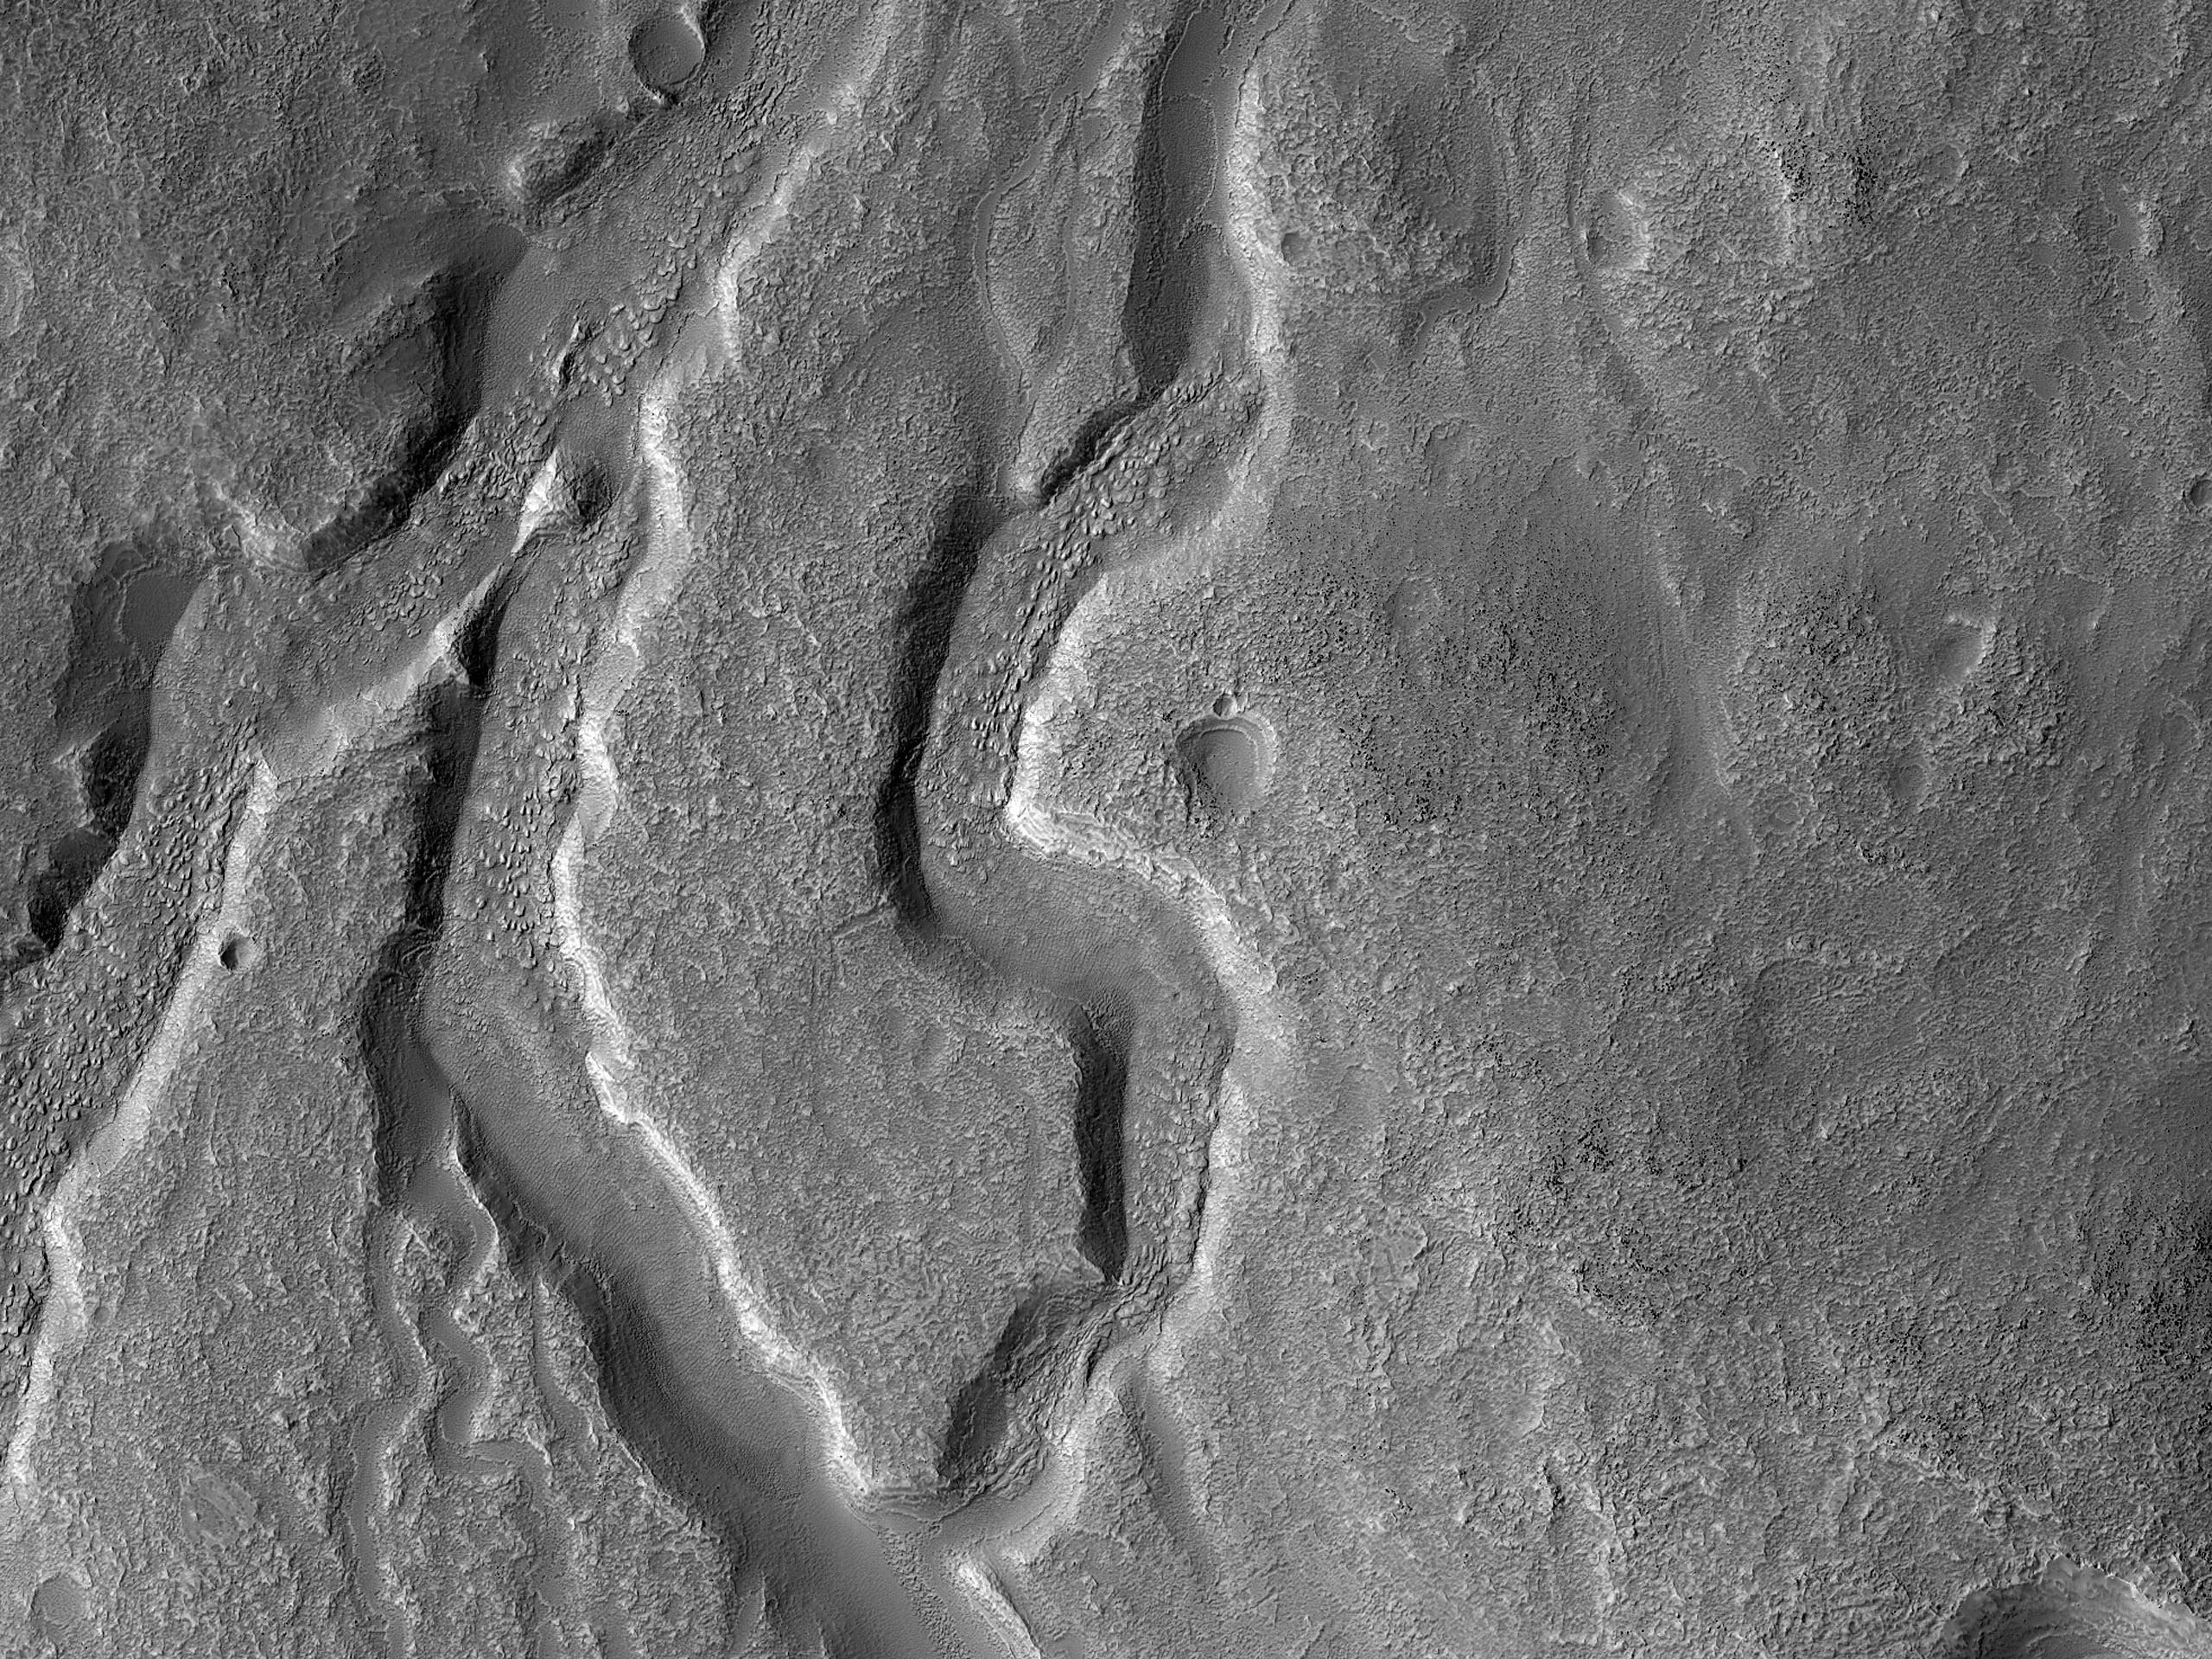 A Channel near Moreux Crater